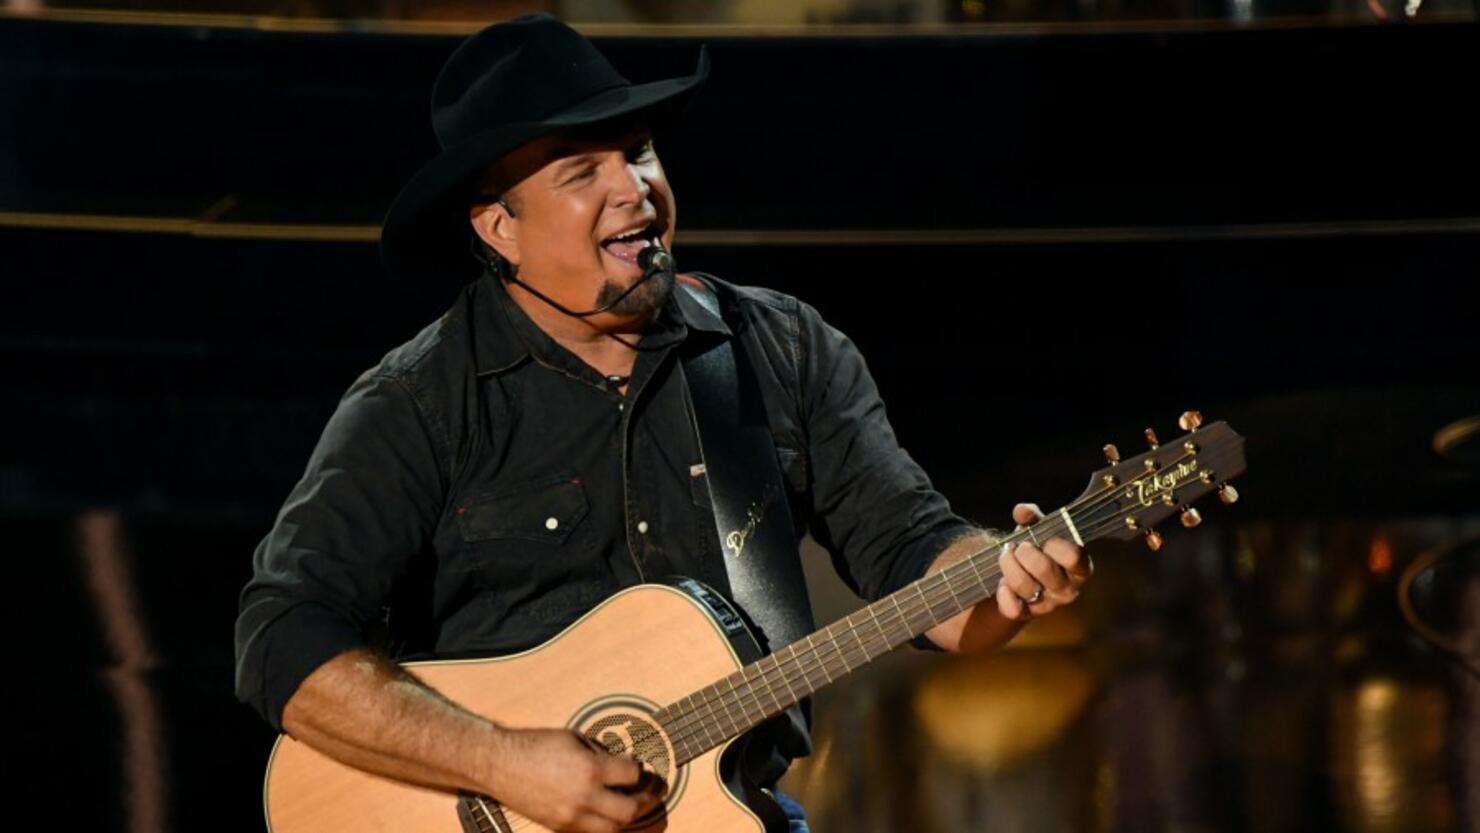 Garth Brooks Adds Another Show To His November Concert Schedule | iHeart